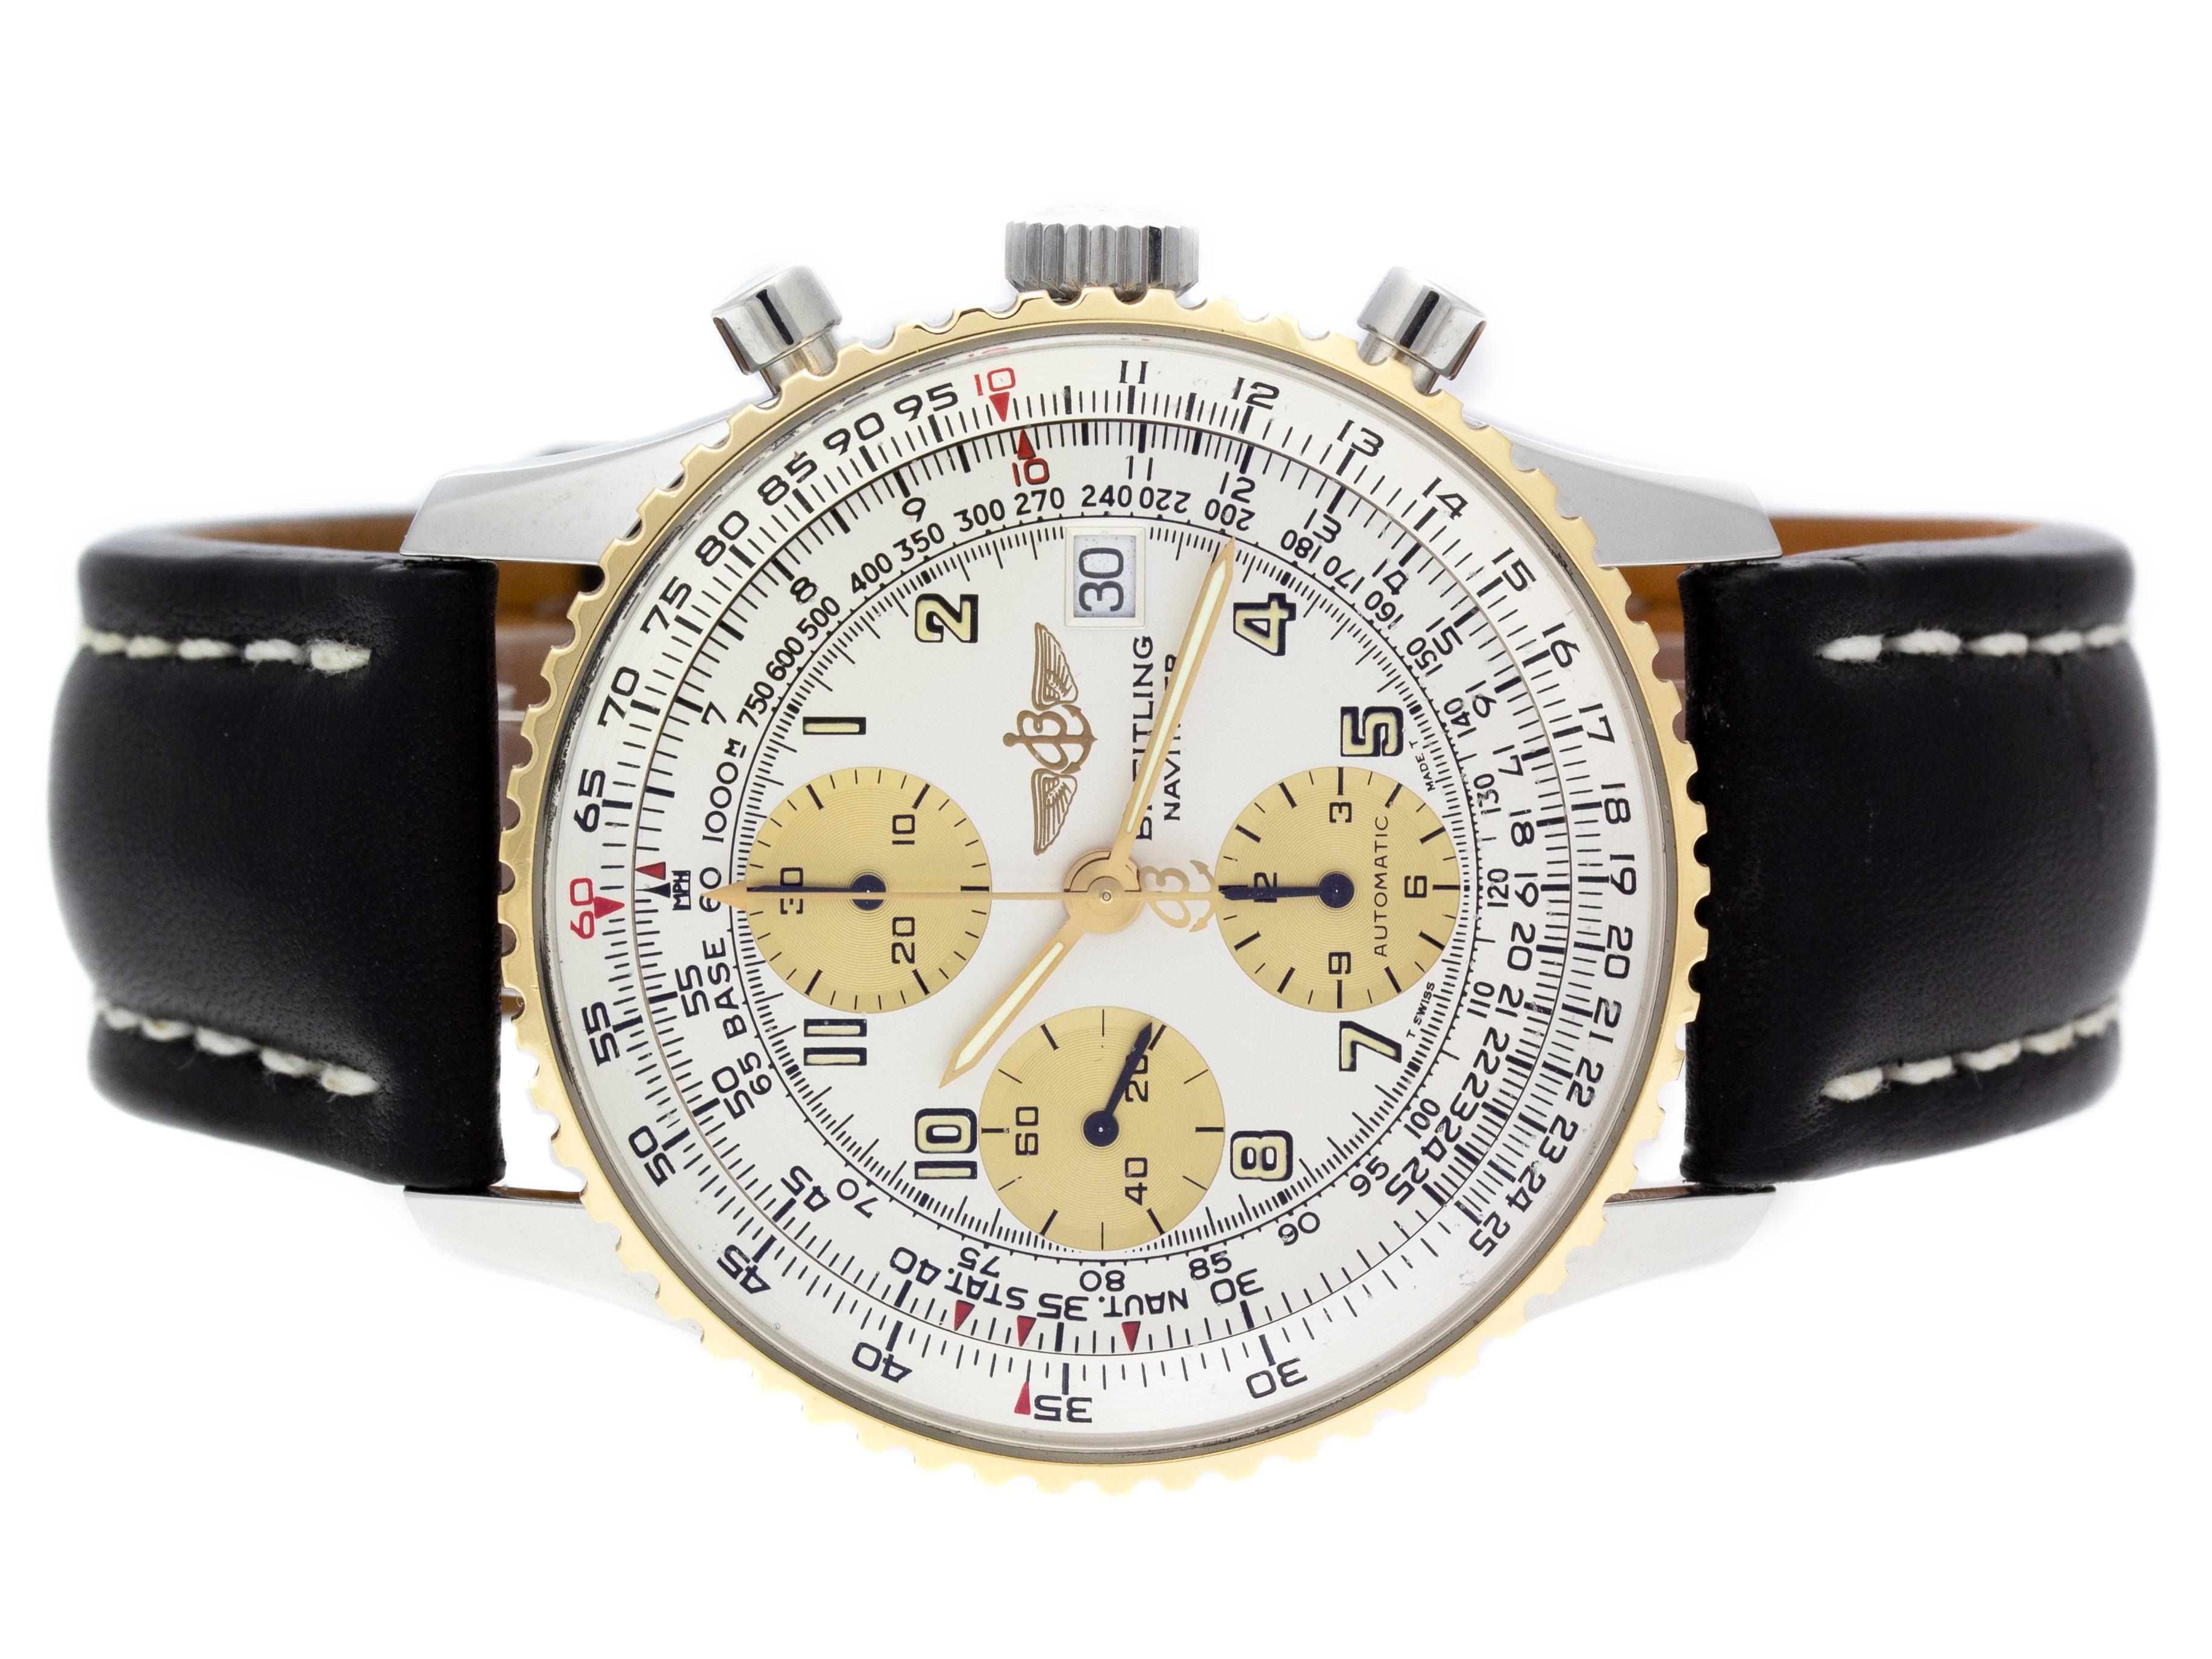 Brand	Breitling
Series	Old Navitimer 
Model	D13020
Gender	Men's
Condition	Great Condition Pre-owned Watch.
Material	18K Yellow Gold, Stainless Steel, & Leather
Finish	Polished 
Caseback	Solid
Diameter	41mm 
Thickness	
Crystal	Sapphire Scratch